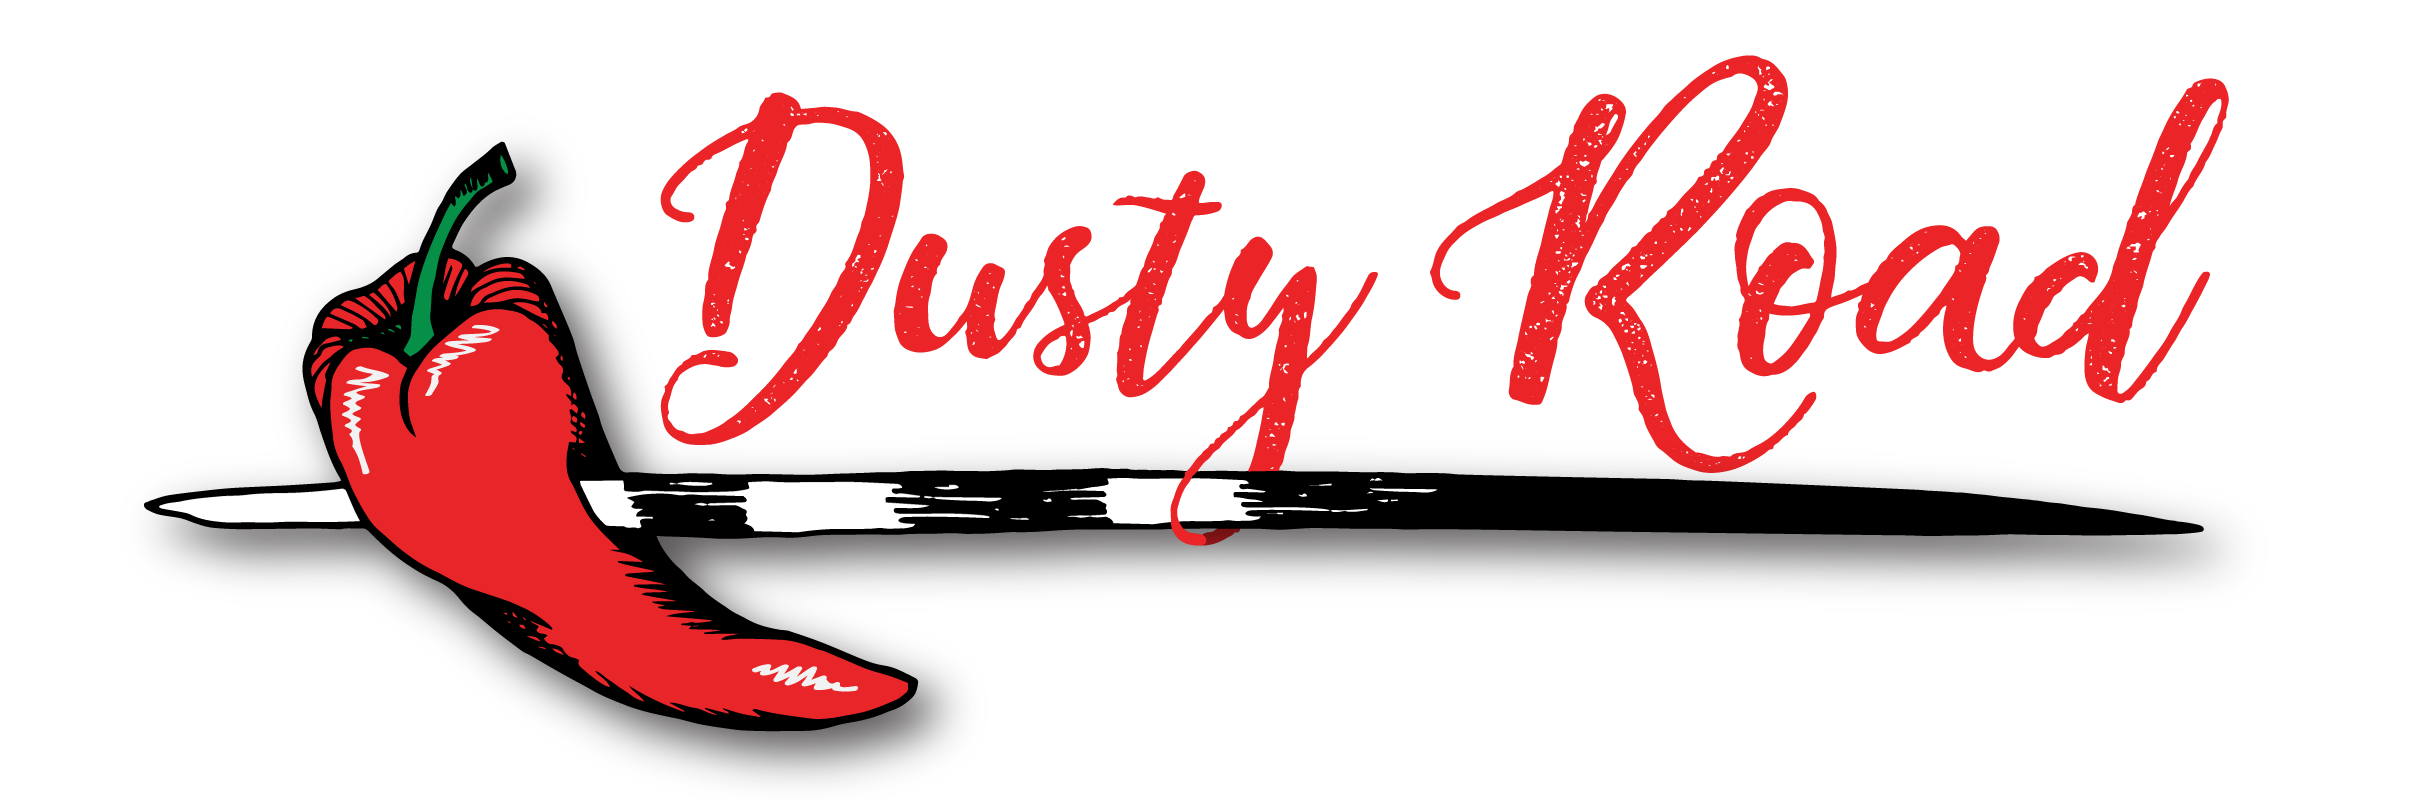 Dusty Road Township Experience